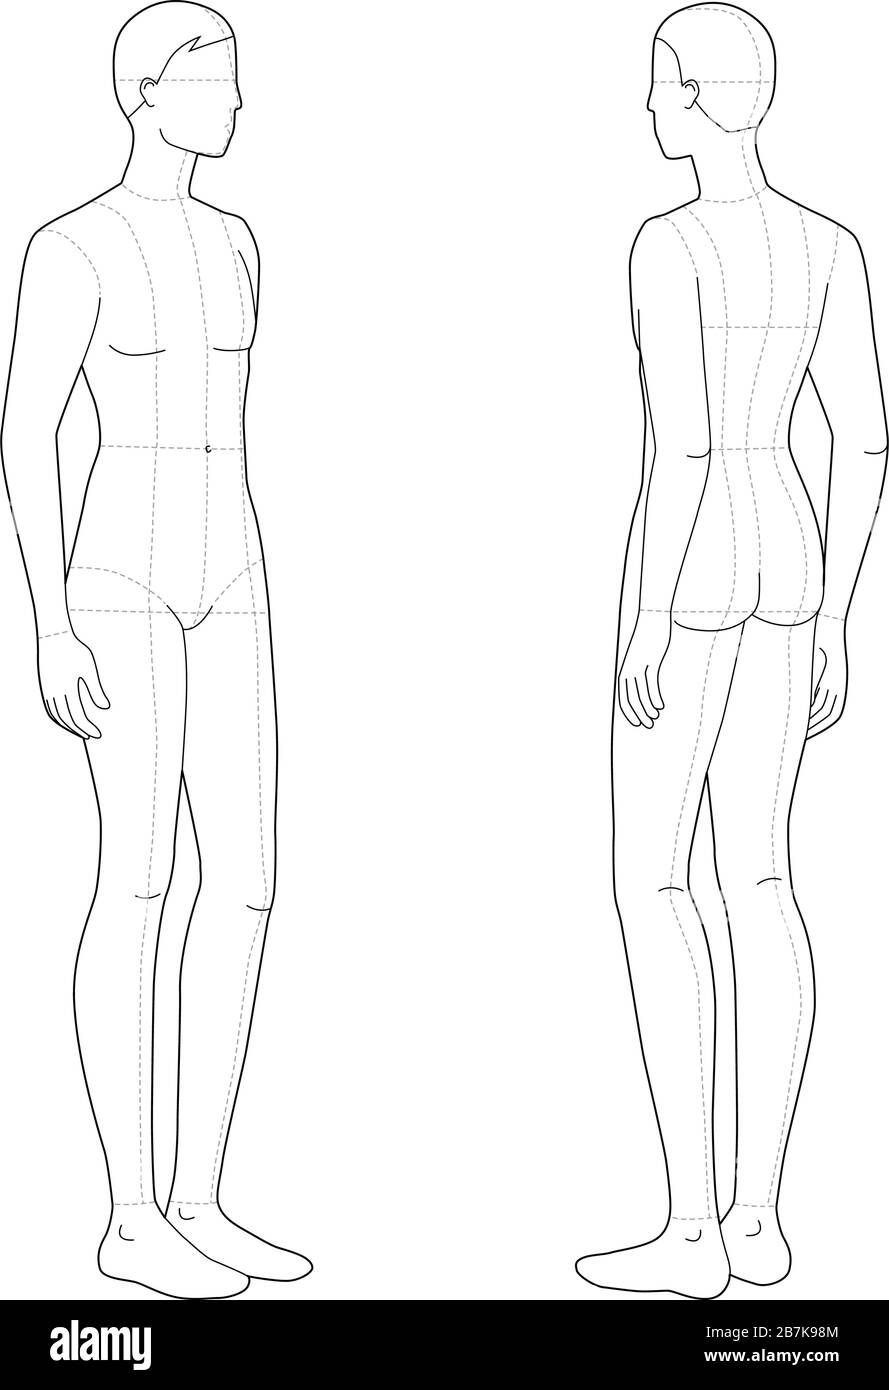 Fashion template of standing men. 9 head size for technical drawing ...